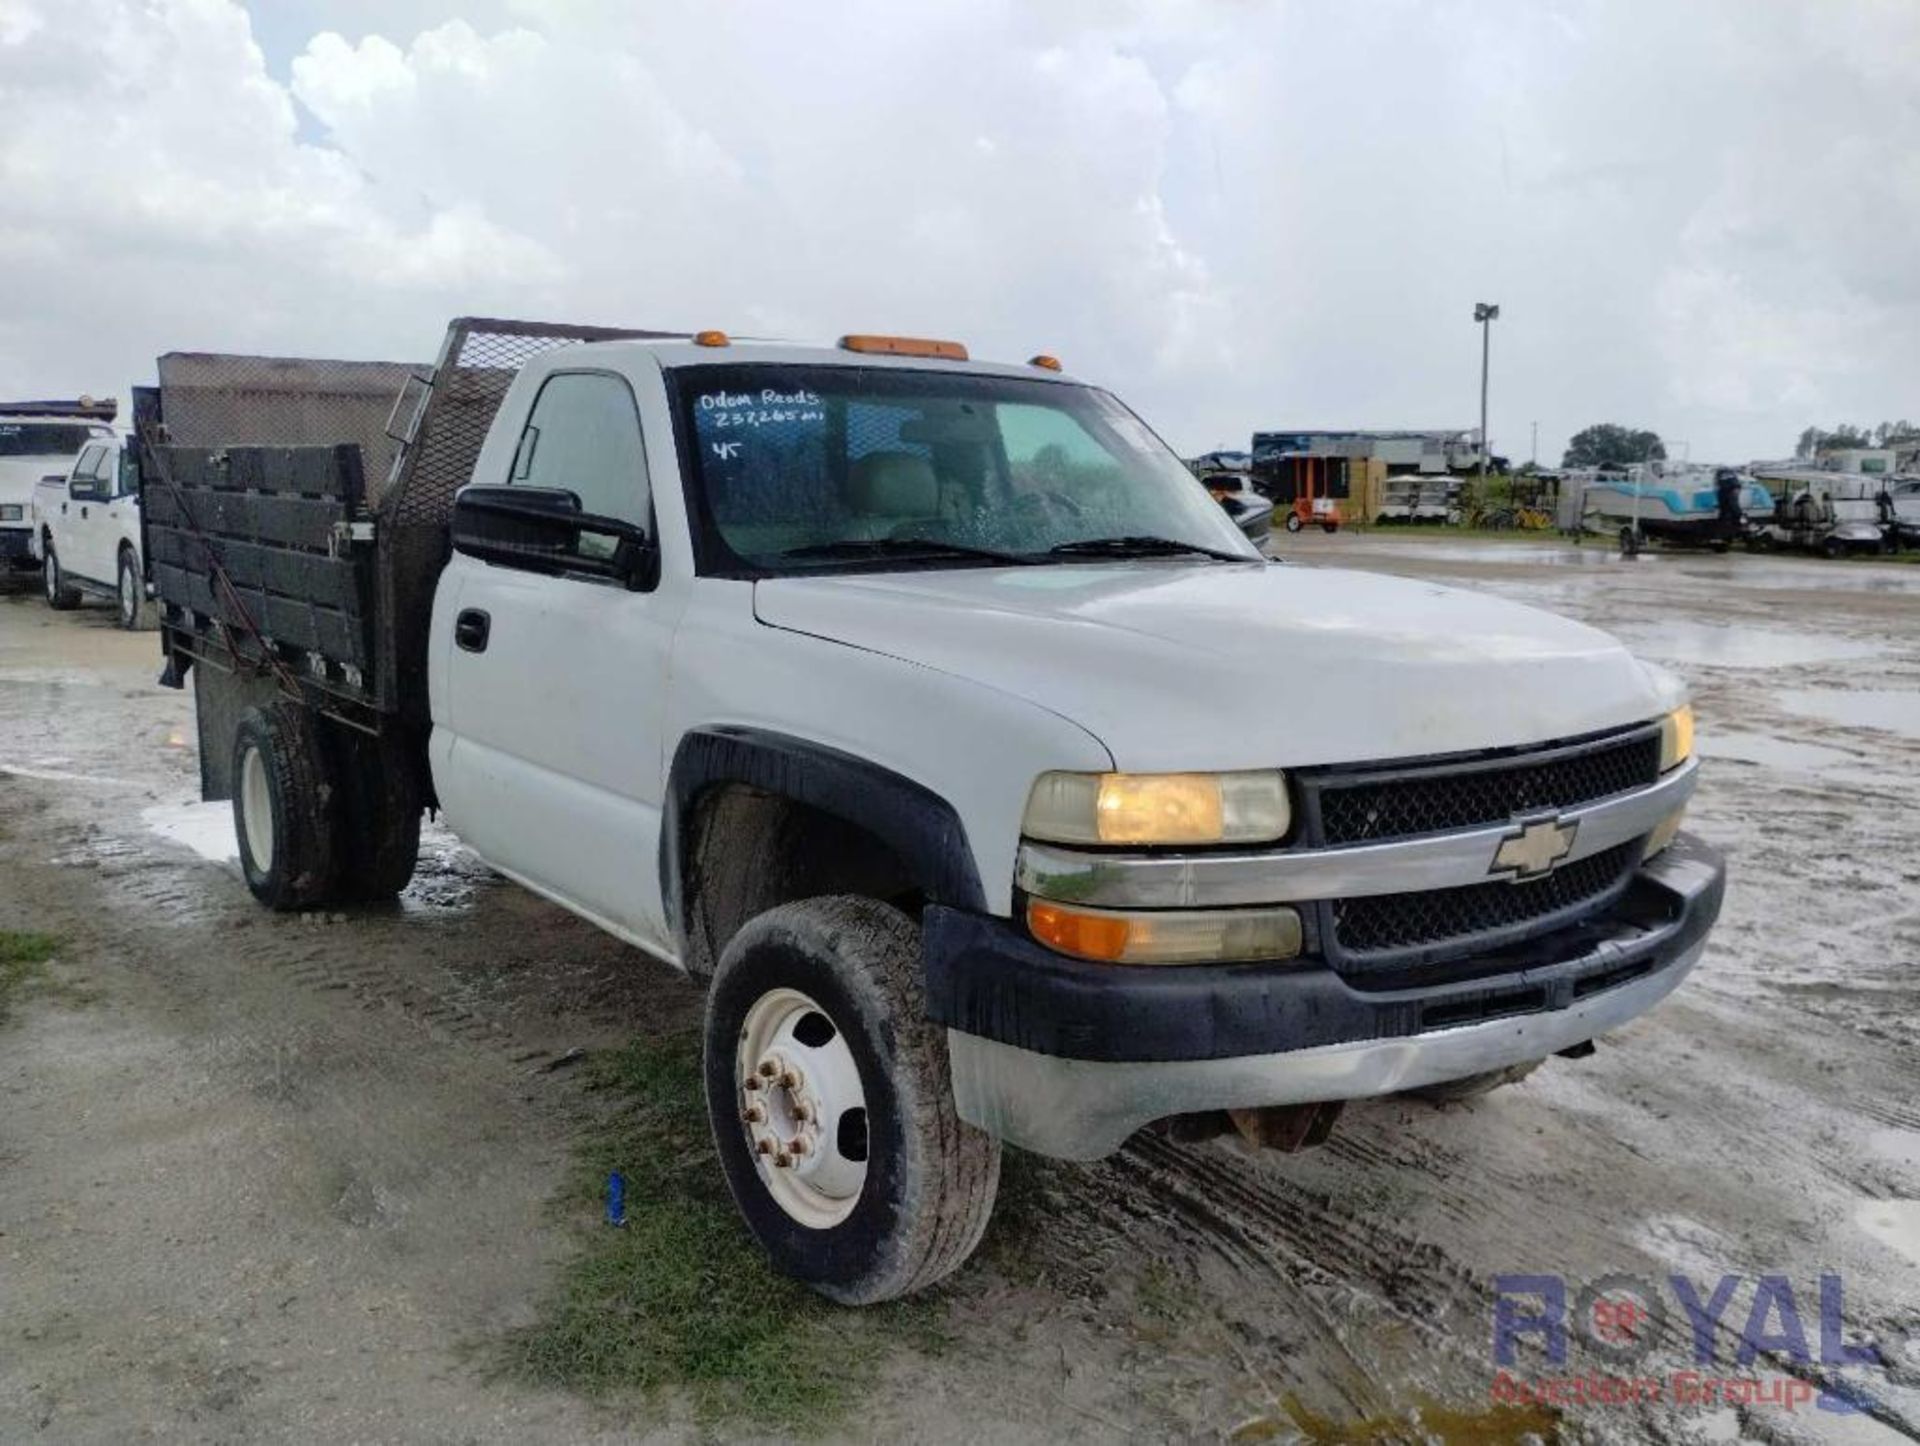 2001 Chevrolet 3500 Flatbed Truck - Image 2 of 29